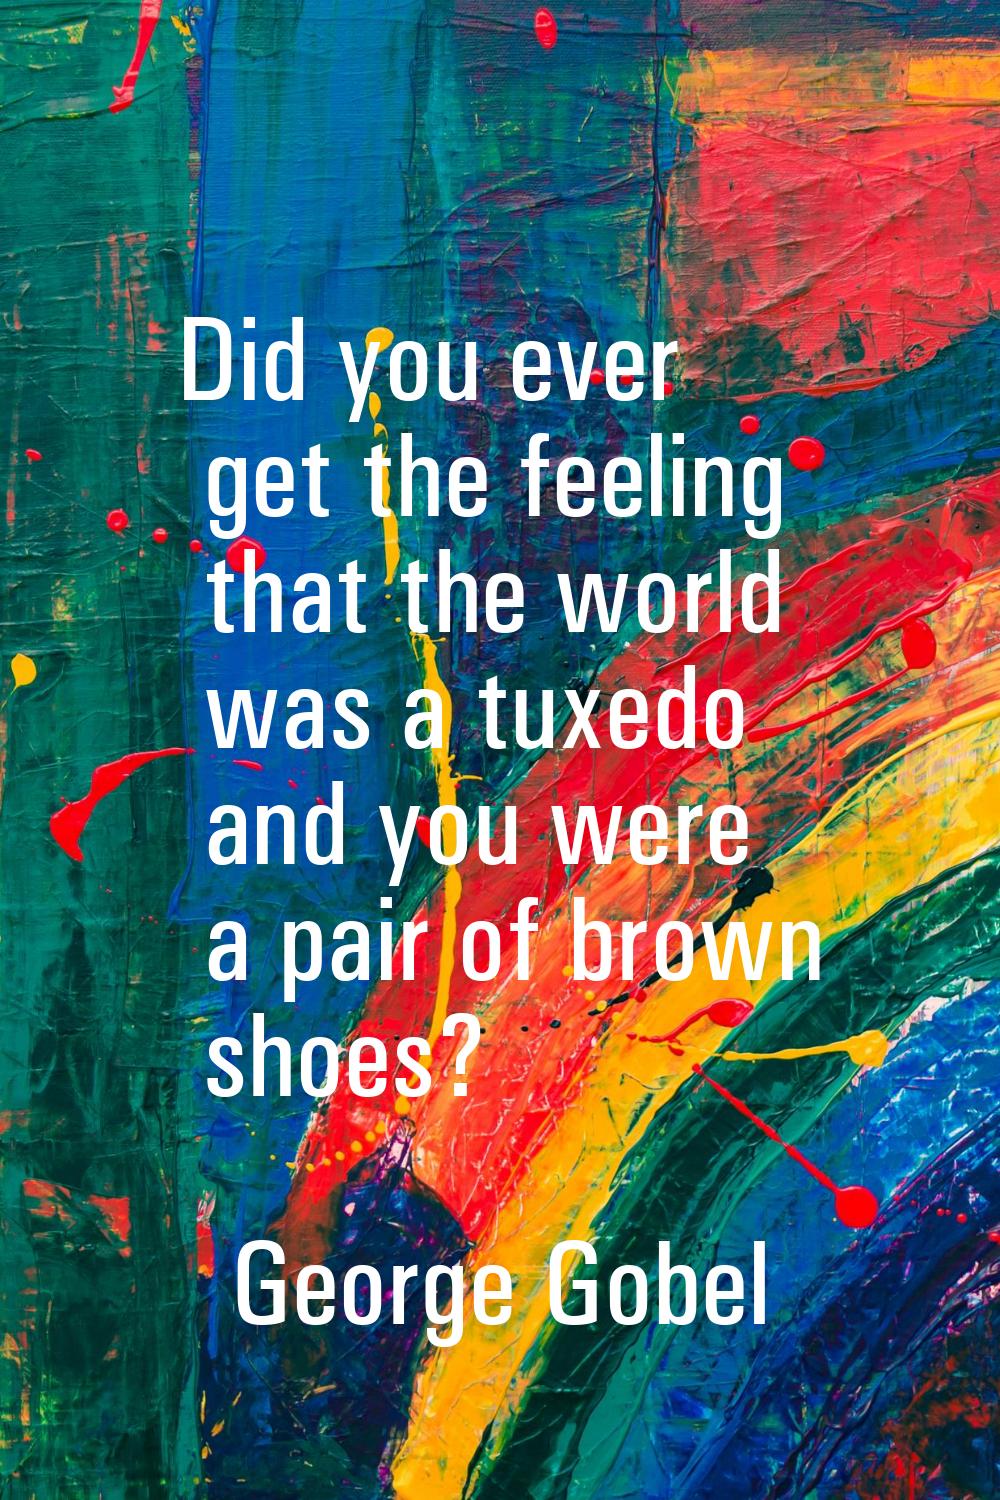 Did you ever get the feeling that the world was a tuxedo and you were a pair of brown shoes?